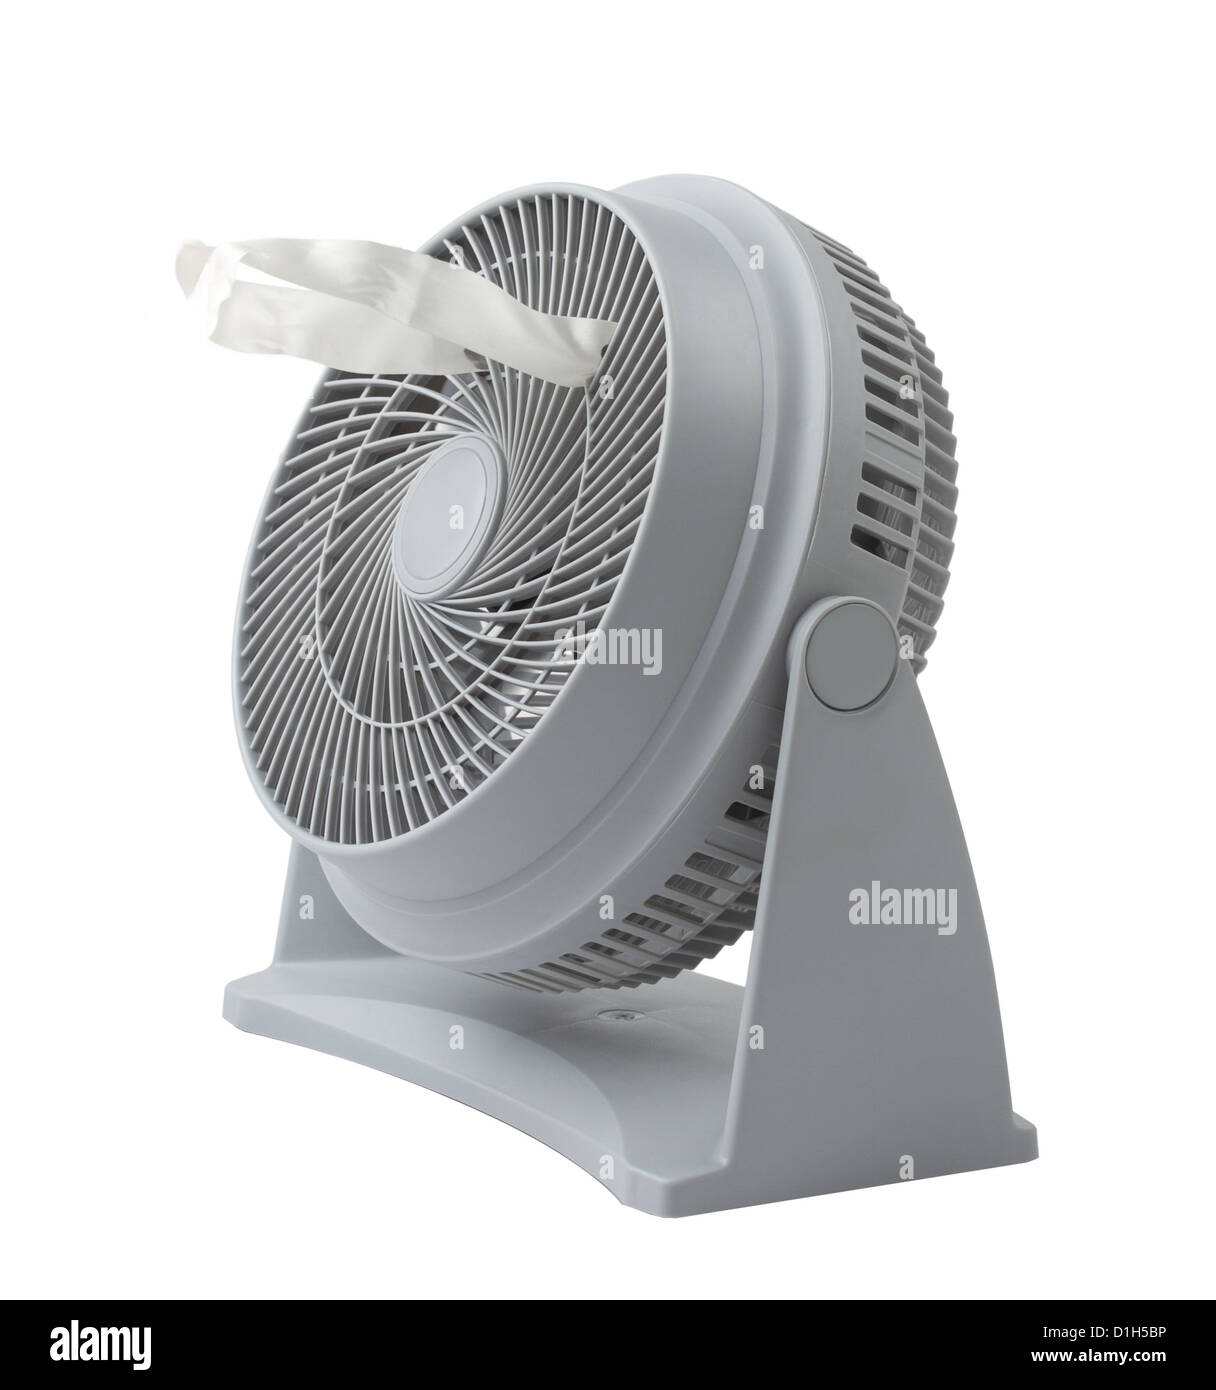 Compact windy fan in gray color isolated Stock Photo